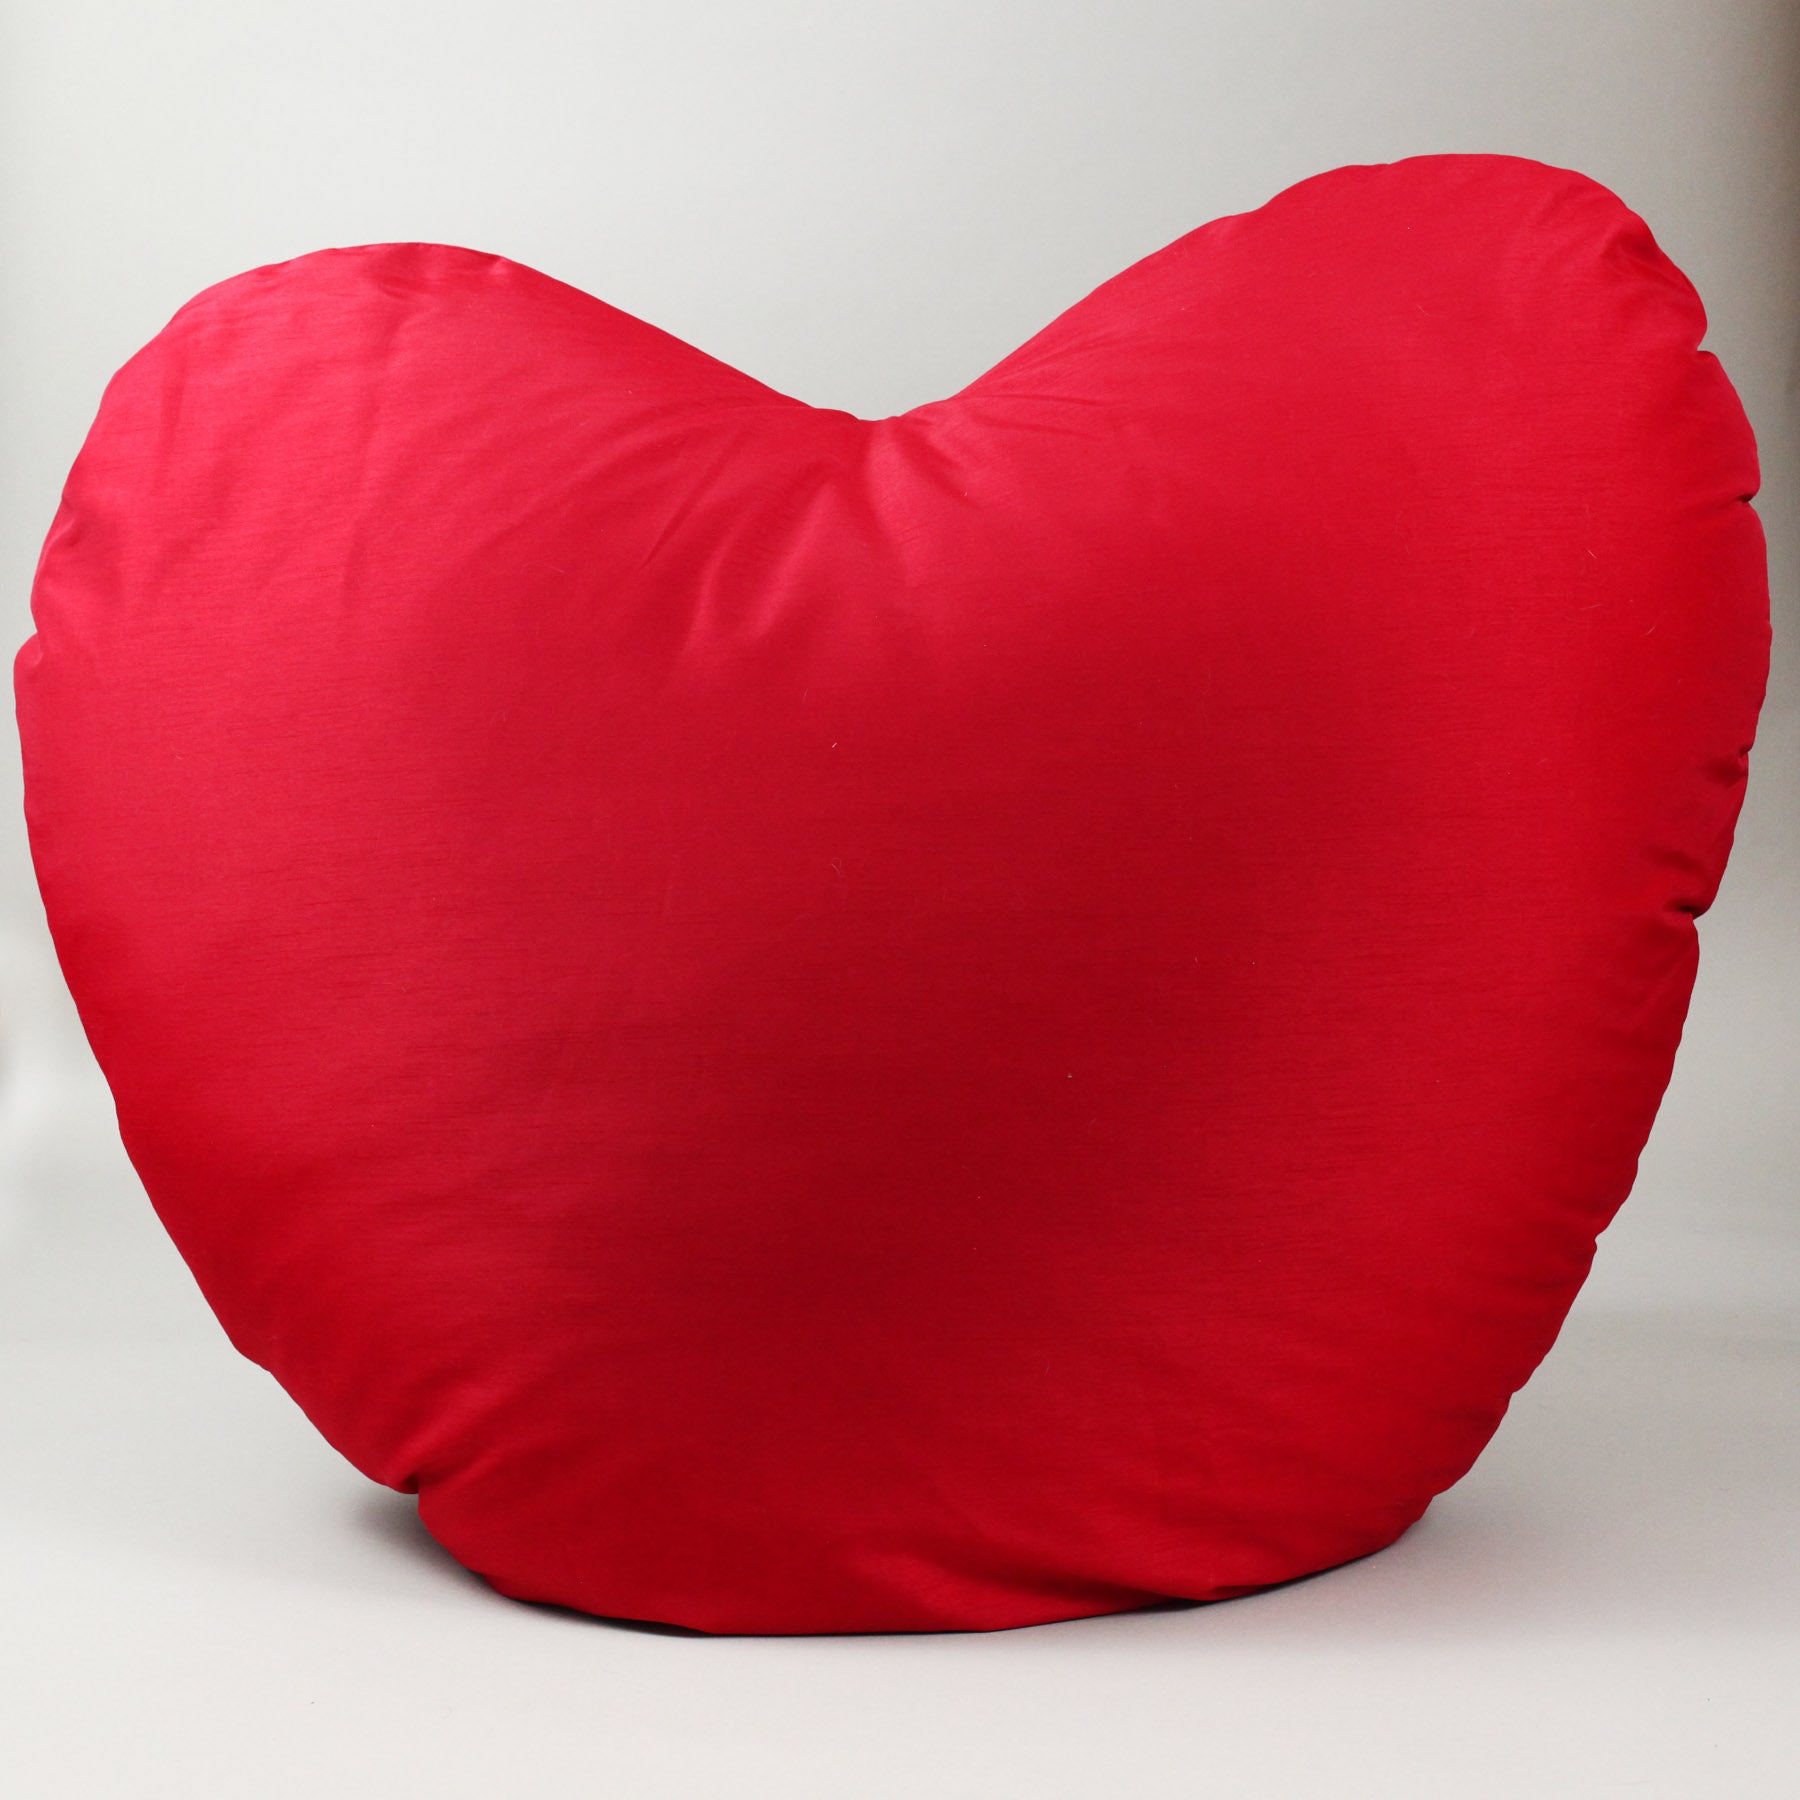 56in Enormous Red Plush Heart Body Pillow